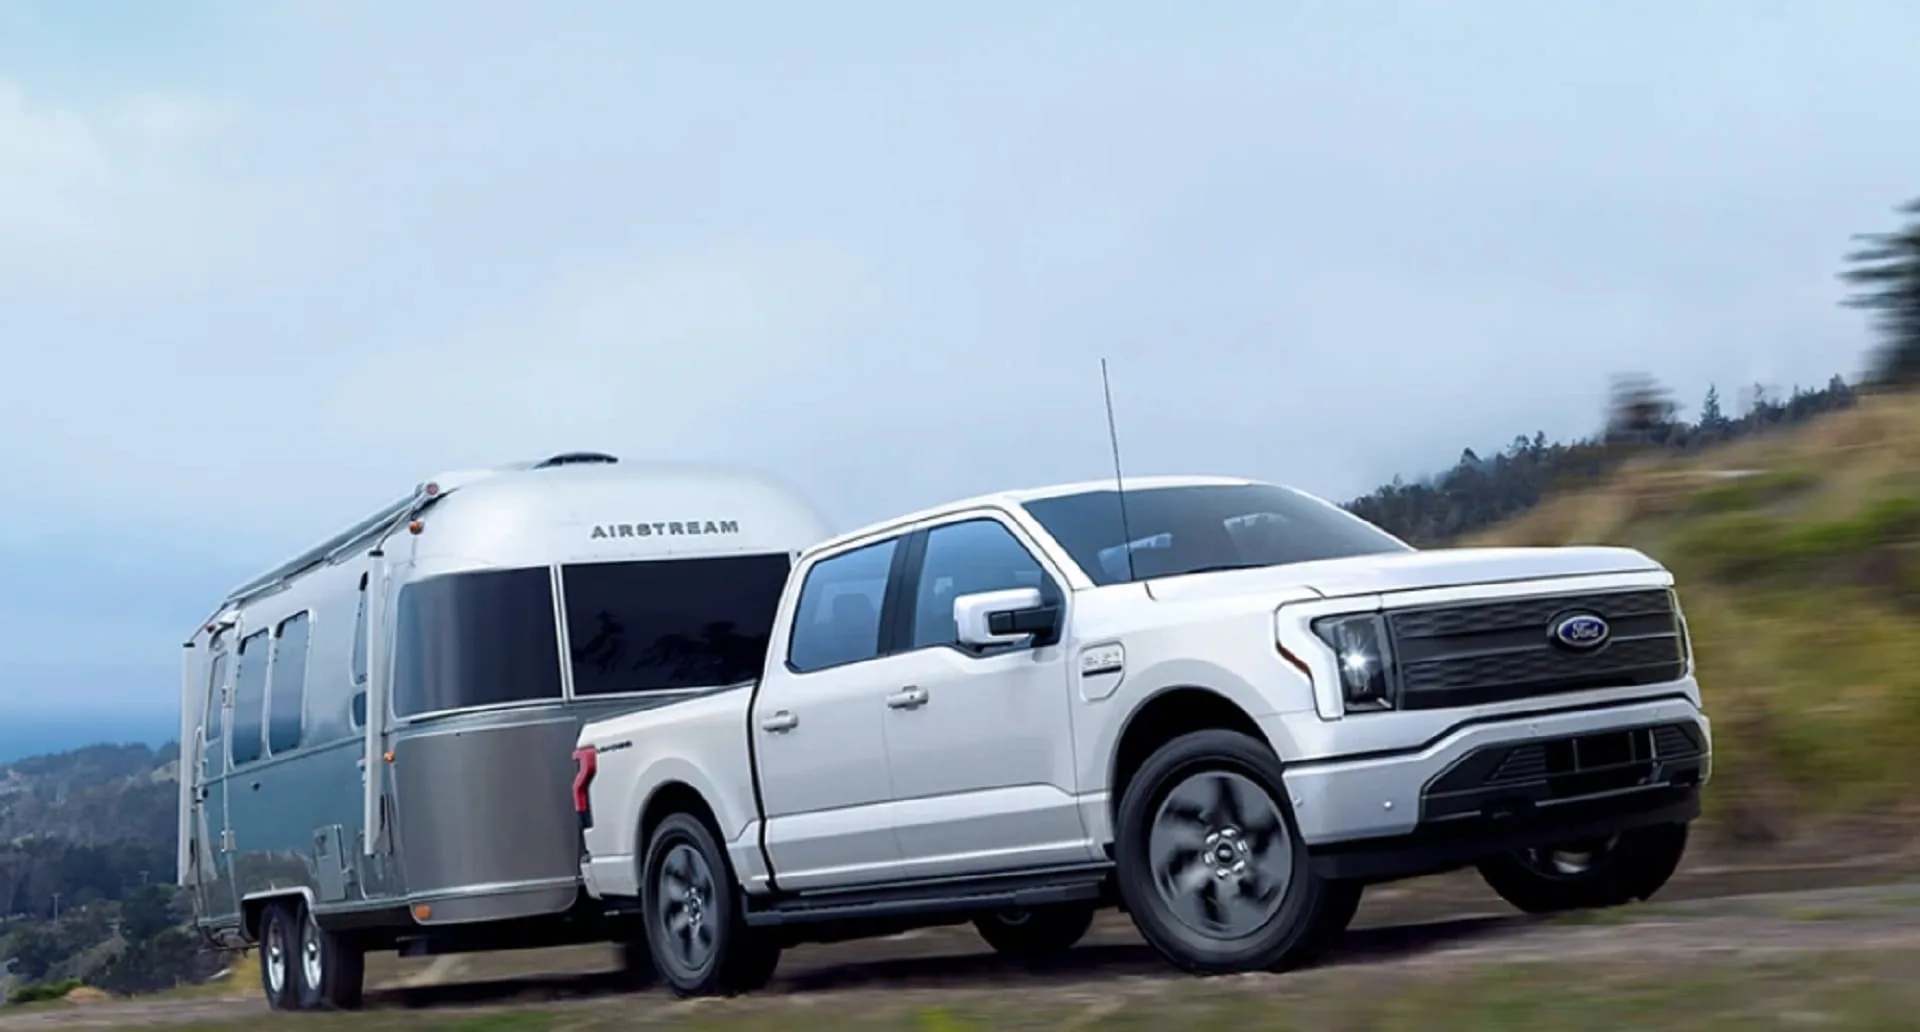 Photo of the Ford F-150 Lightning all-electric pickup truck towing an Airstream.